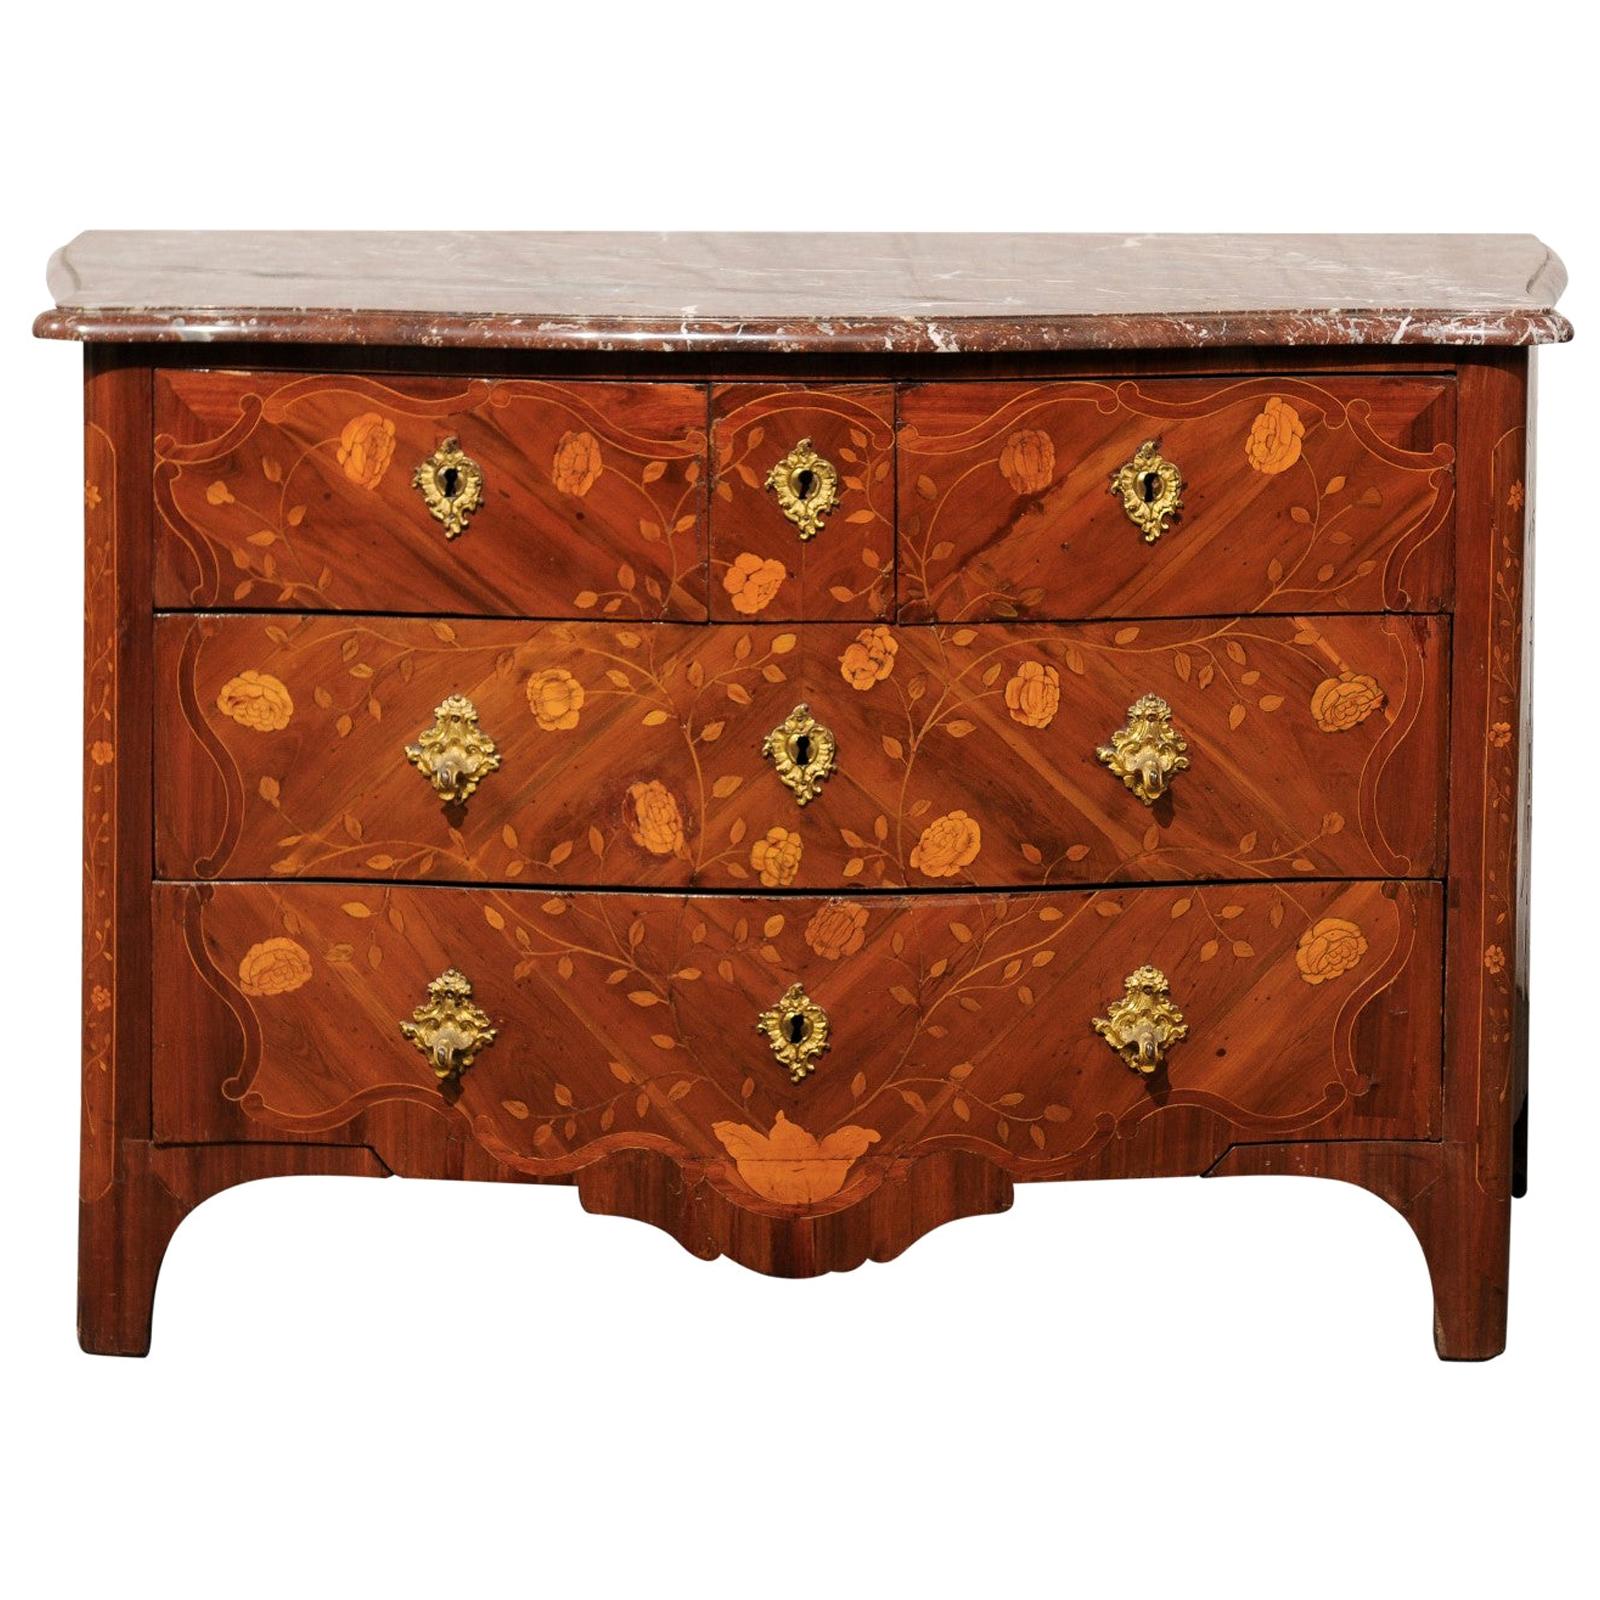 Mid-18th Century Regence Marquetry Marble-Top Commode For Sale